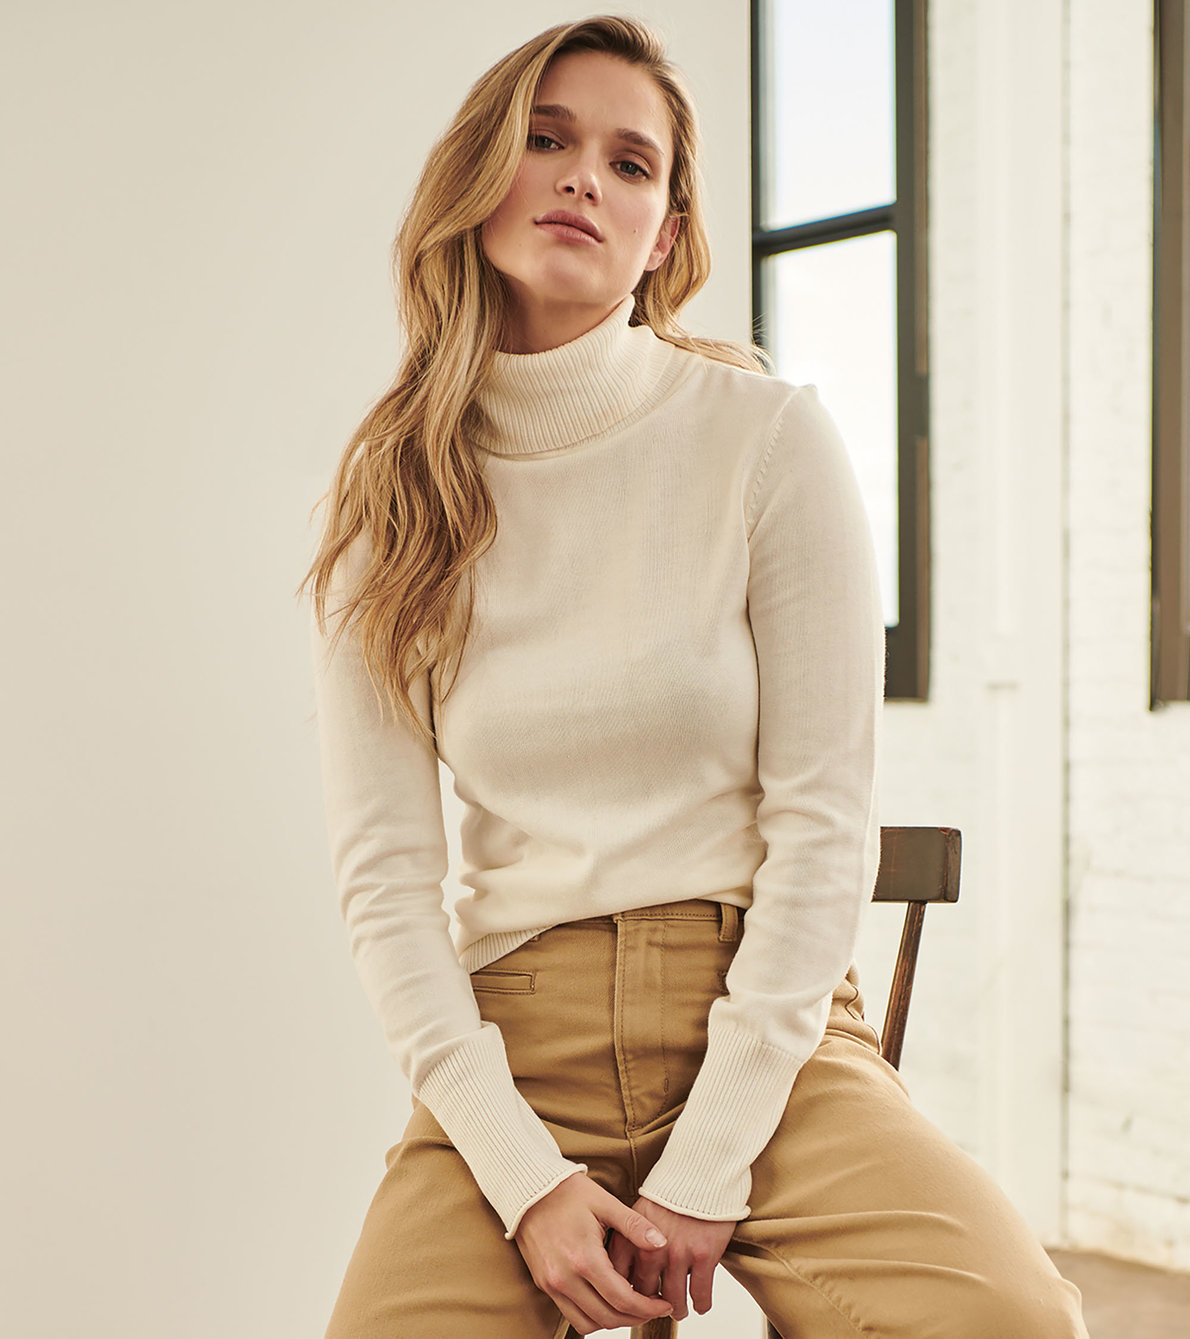 View larger image of Turtleneck Sweater - Cream